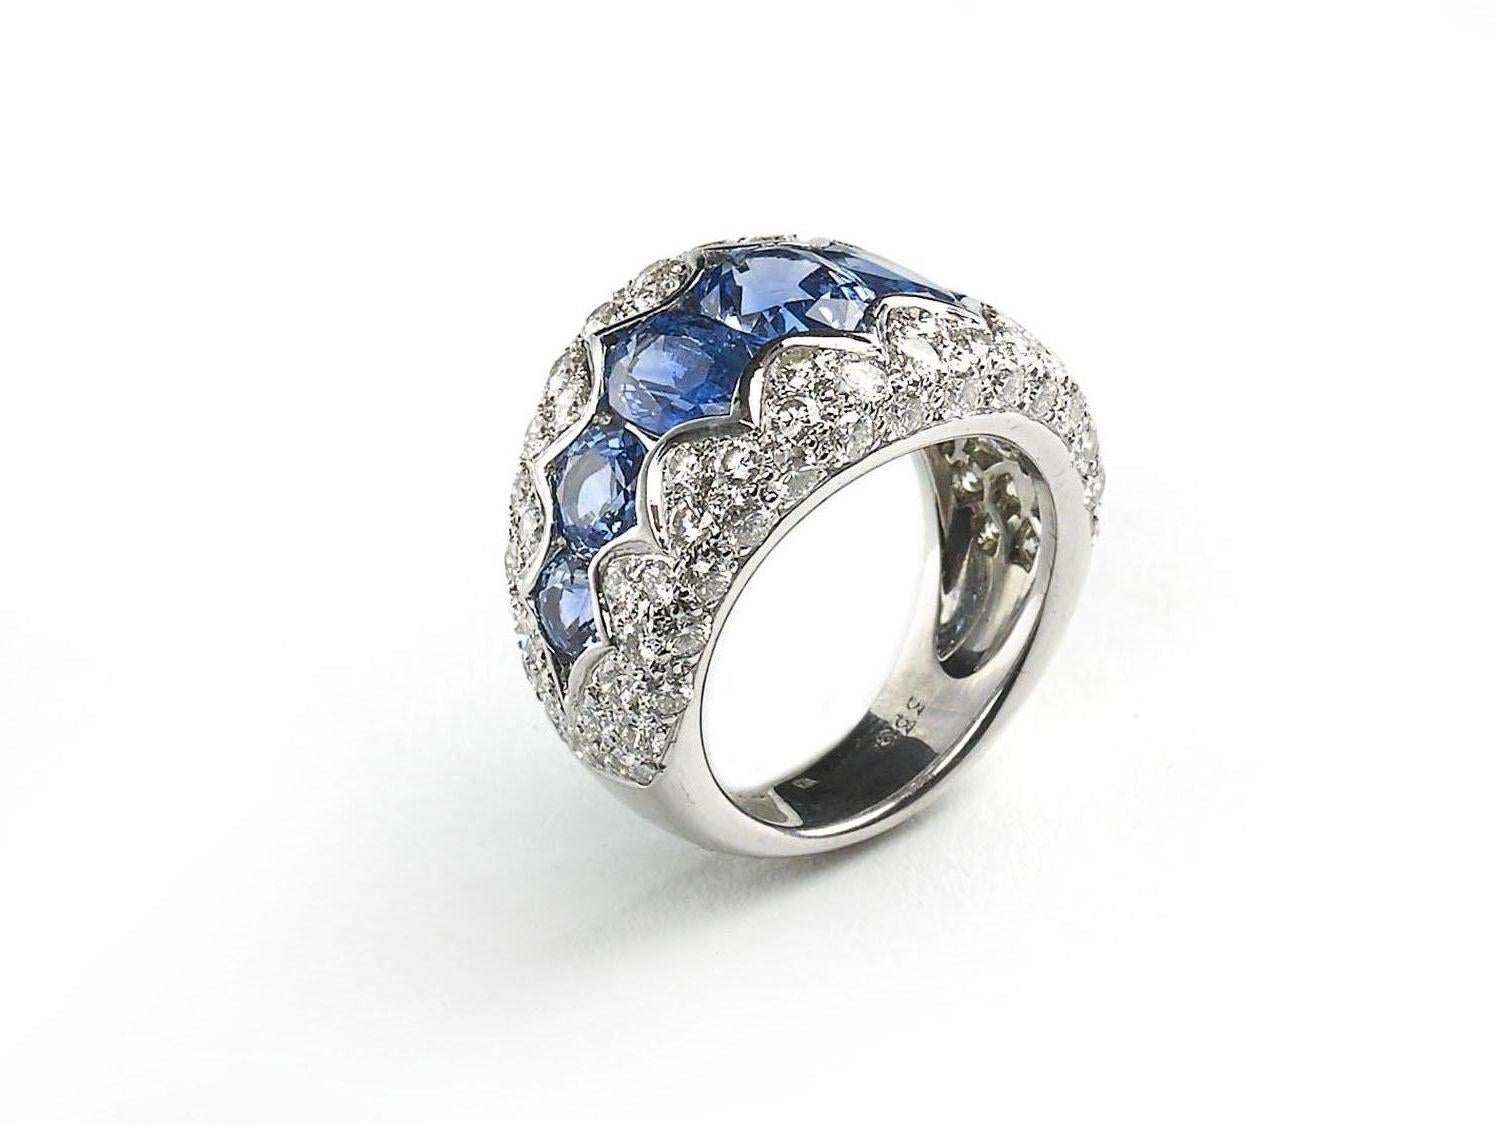 A sapphire and diamond ring, set with a central row of graduating oval and round faceted Ceylon sapphires, with a scalloped edged surround, pavé set with round brilliant-cut diamonds, mounted in 18ct white gold, with a French eagle head mark for